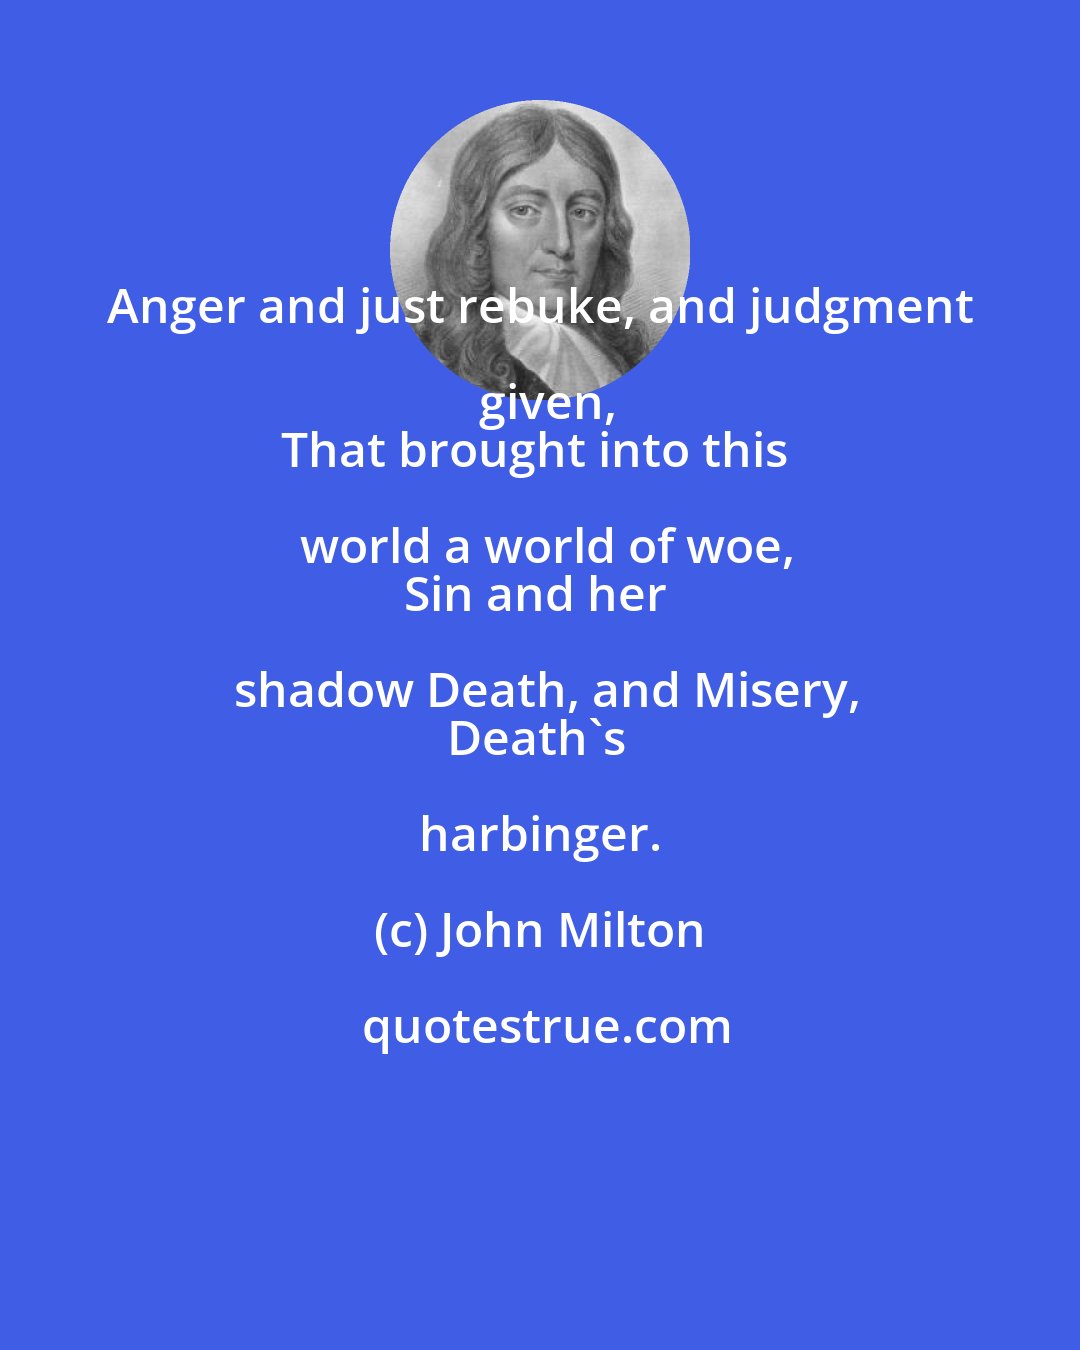 John Milton: Anger and just rebuke, and judgment given,
That brought into this world a world of woe,
Sin and her shadow Death, and Misery,
Death's harbinger.